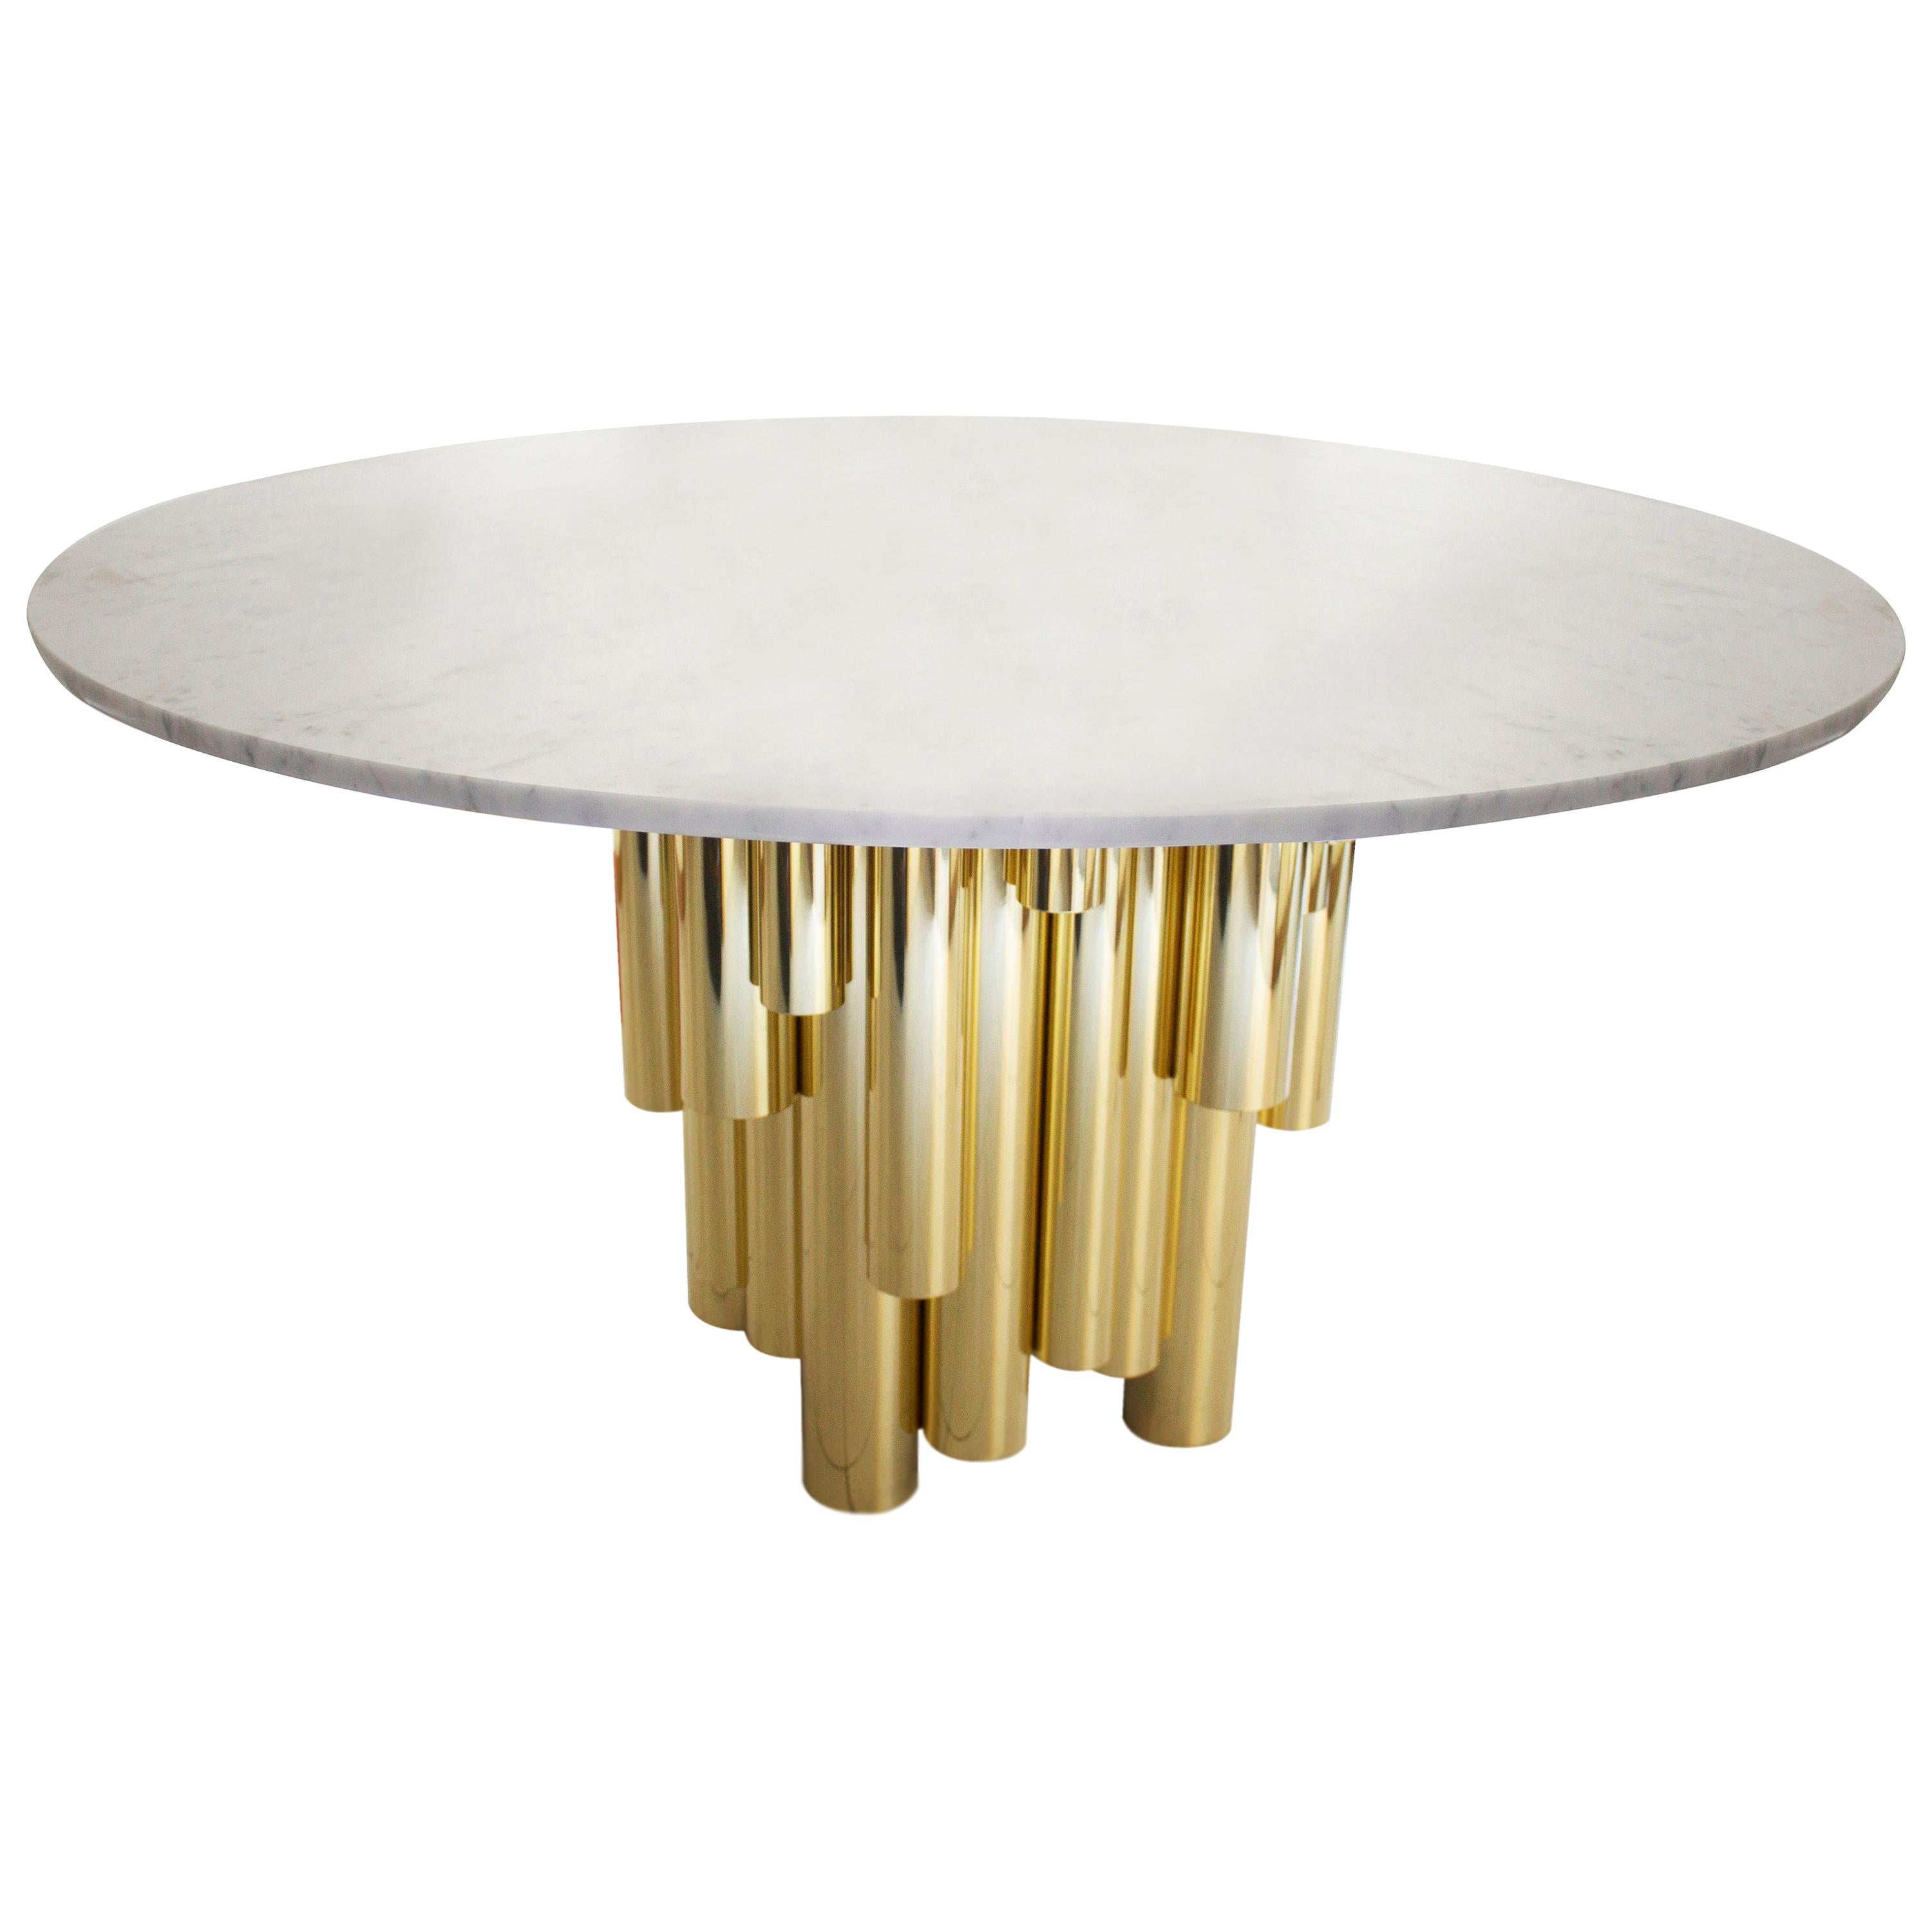 21st Century Wanderlust II Dining Table Carrara Marble Polished Brass Pipes